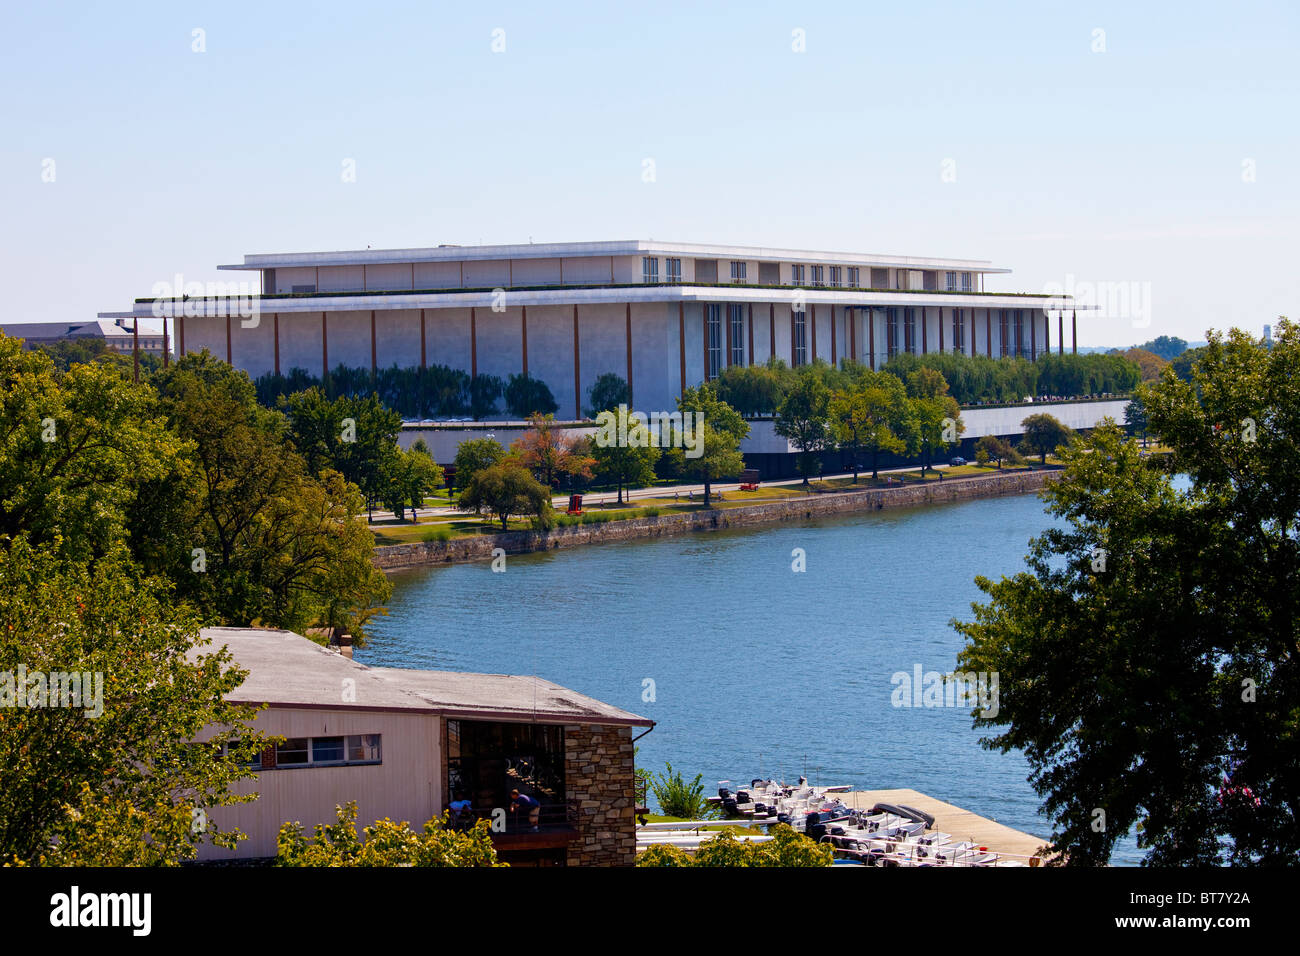 Le John F. Kennedy Center for the Performing Arts, Washington DC Banque D'Images